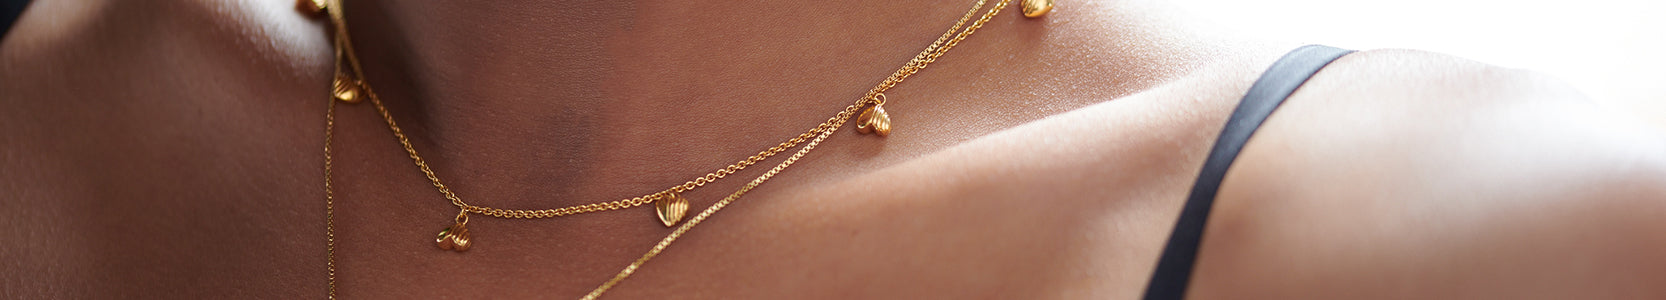 Gold Necklace from Untamed Love collection